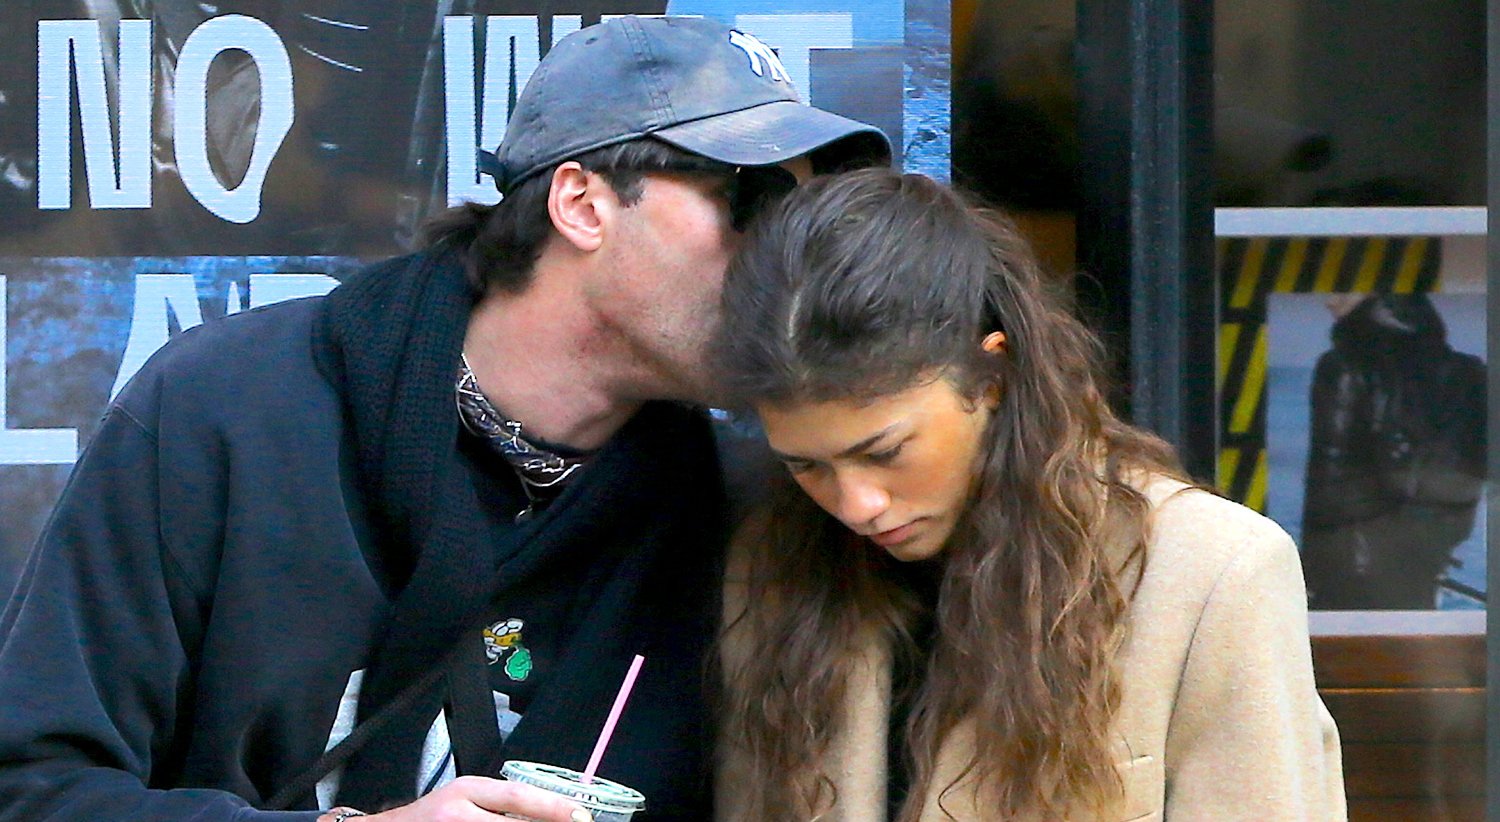 Jacob Elordi Gives Zendaya a Kiss During Casual NYC Outing.